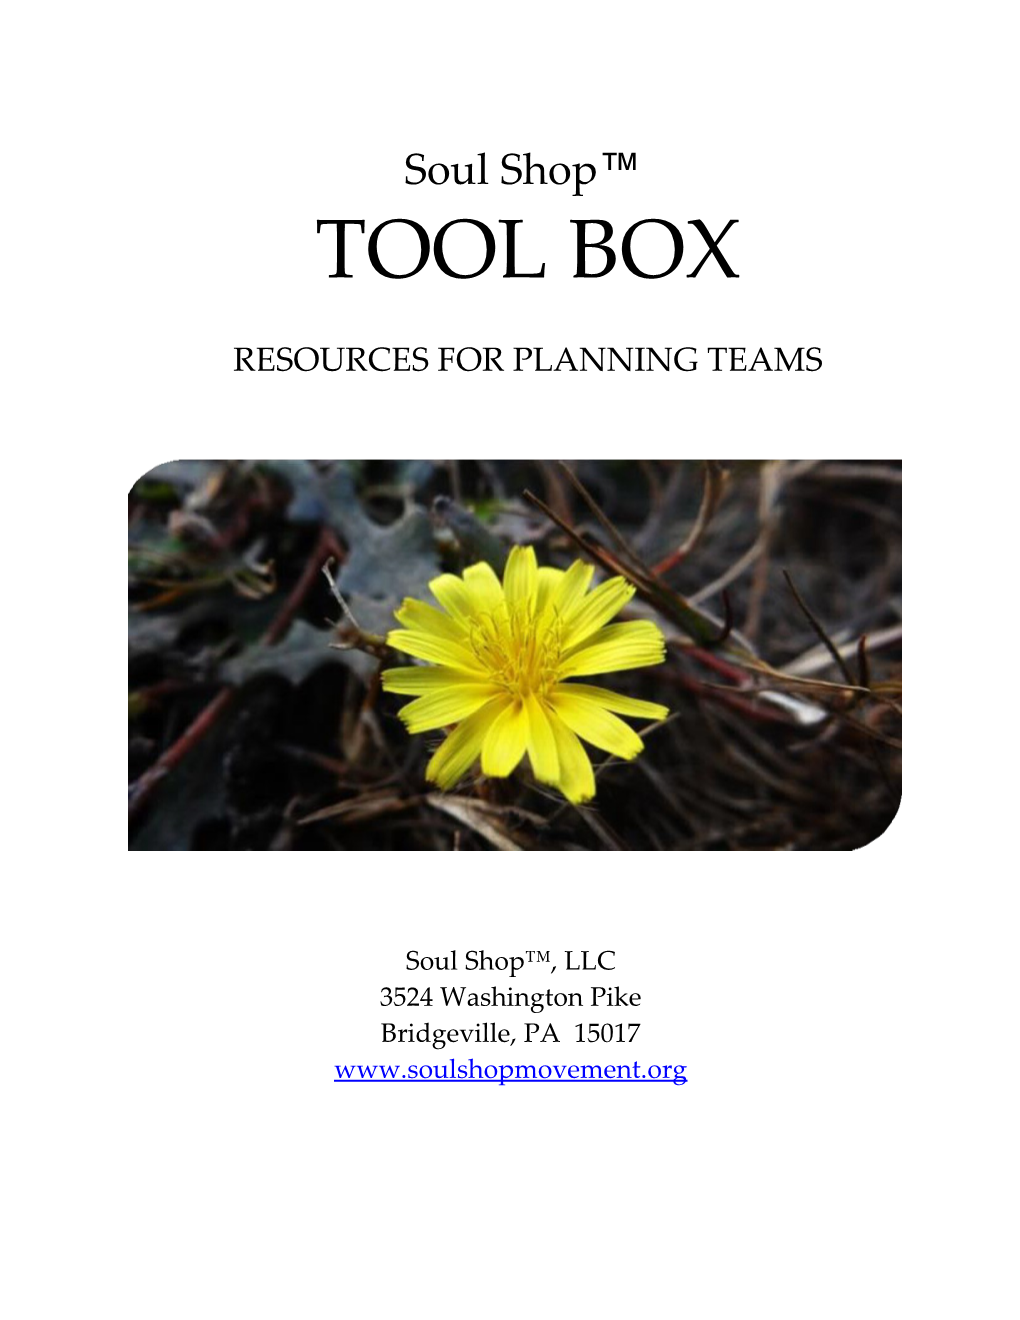 Resources for Planning Teams